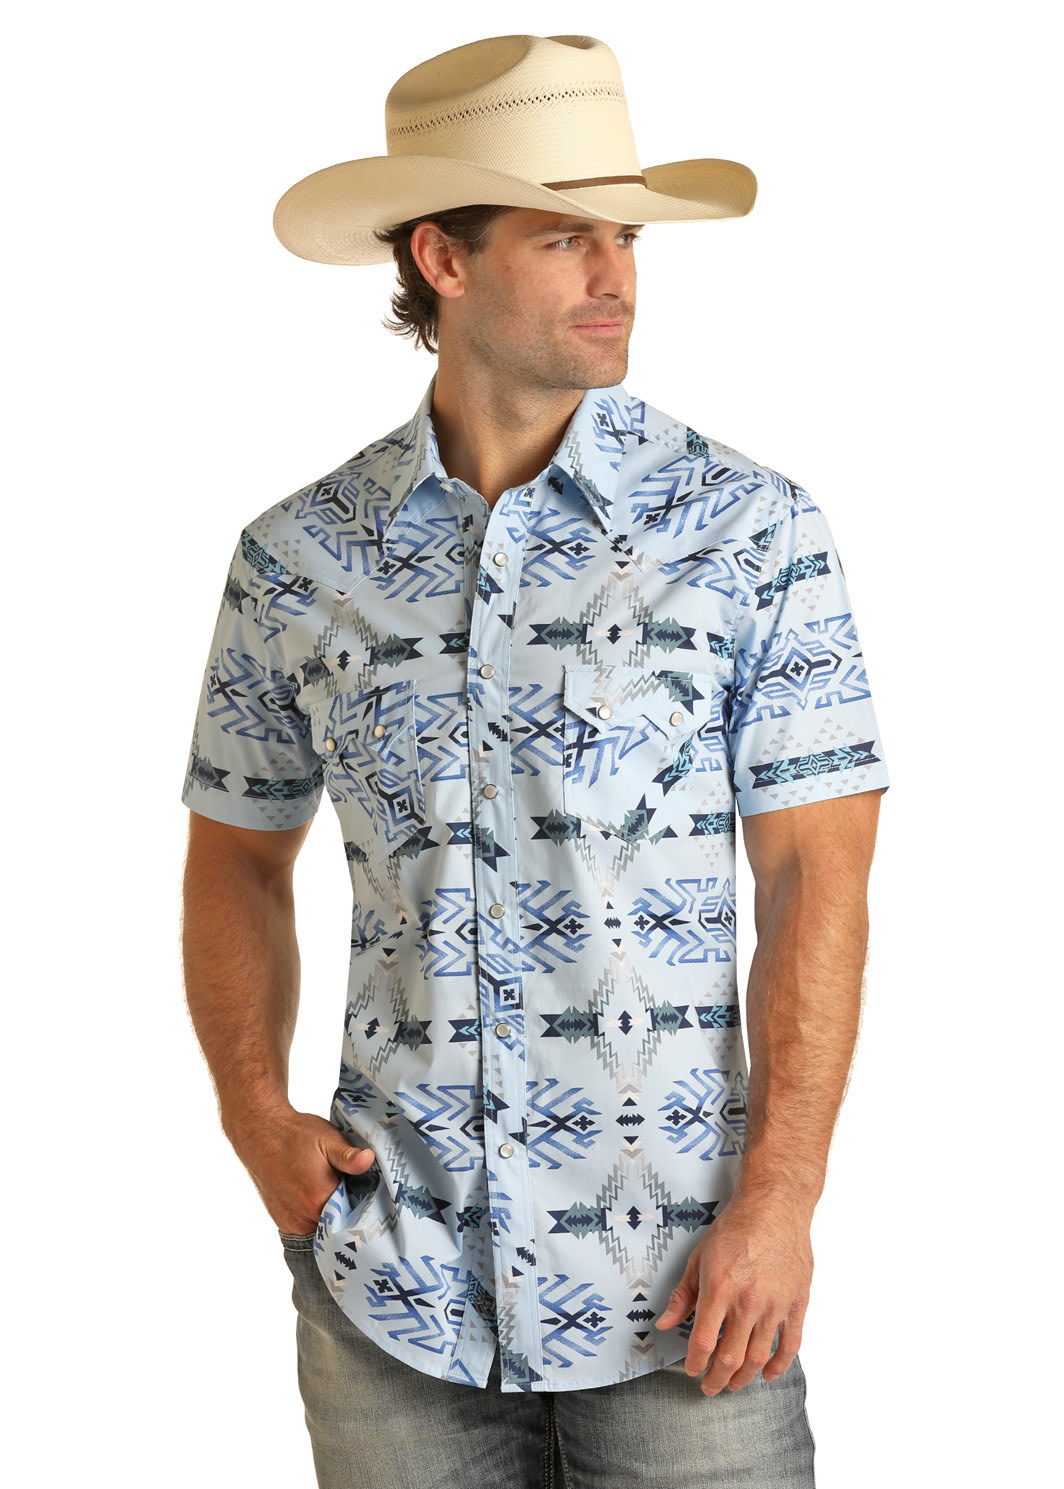 Men's Shirts  Western Inspired Shirts for Men